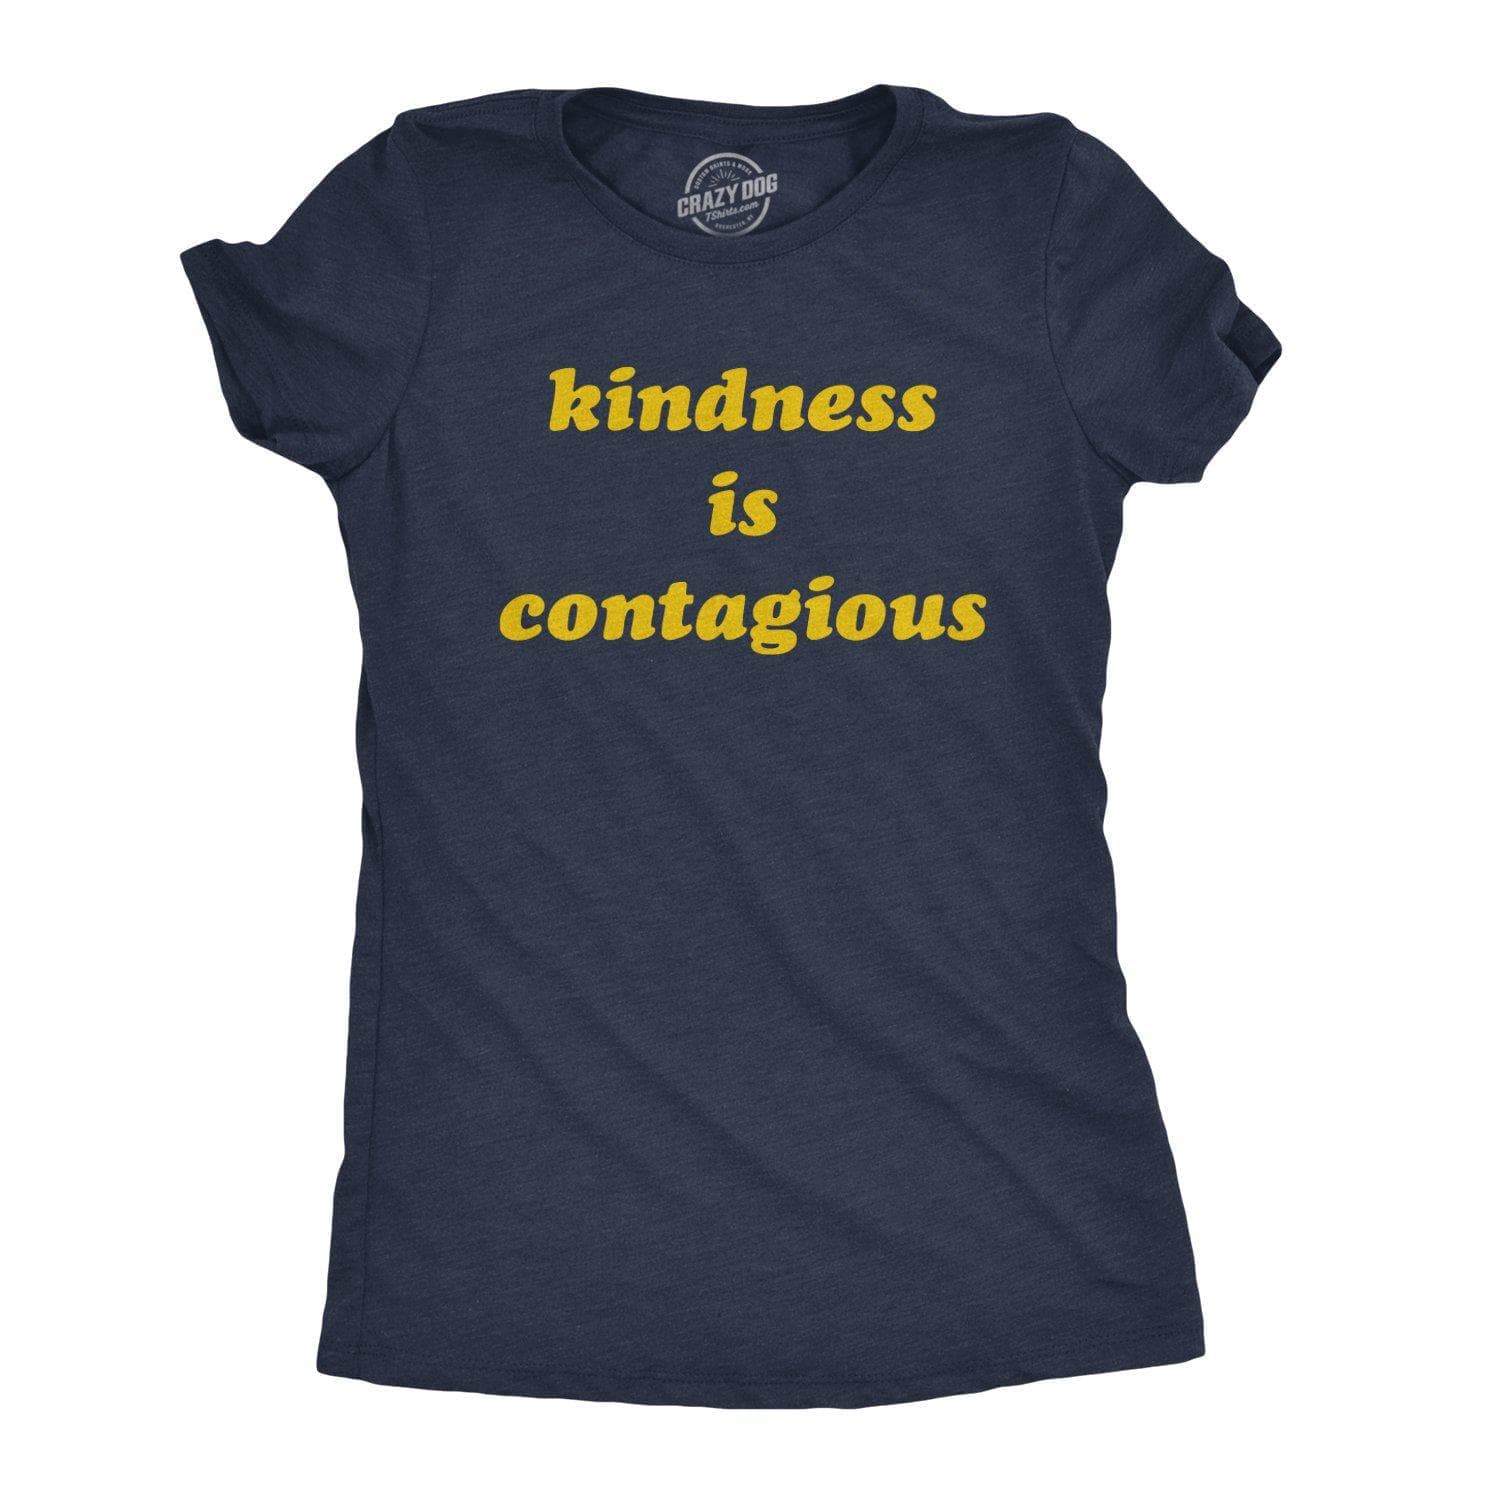 Kindness Is Contagious Women's Tshirt  -  Crazy Dog T-Shirts